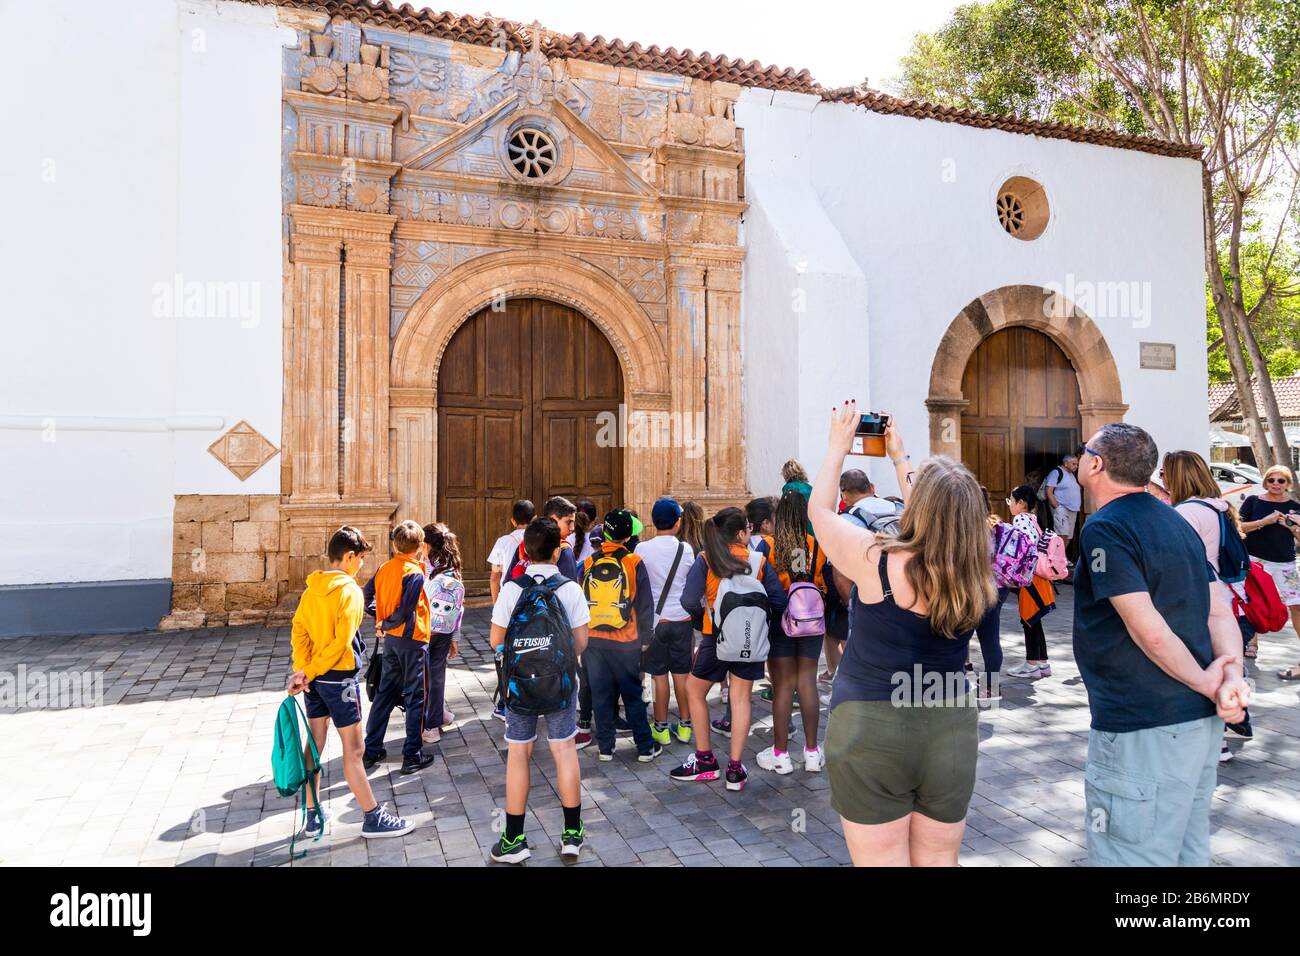 A school group and tourists admiring the carving with Aztec influences on the church of Iglesia Nuestra Senora de la Regla at Pajara on the Canary Isl Stock Photo